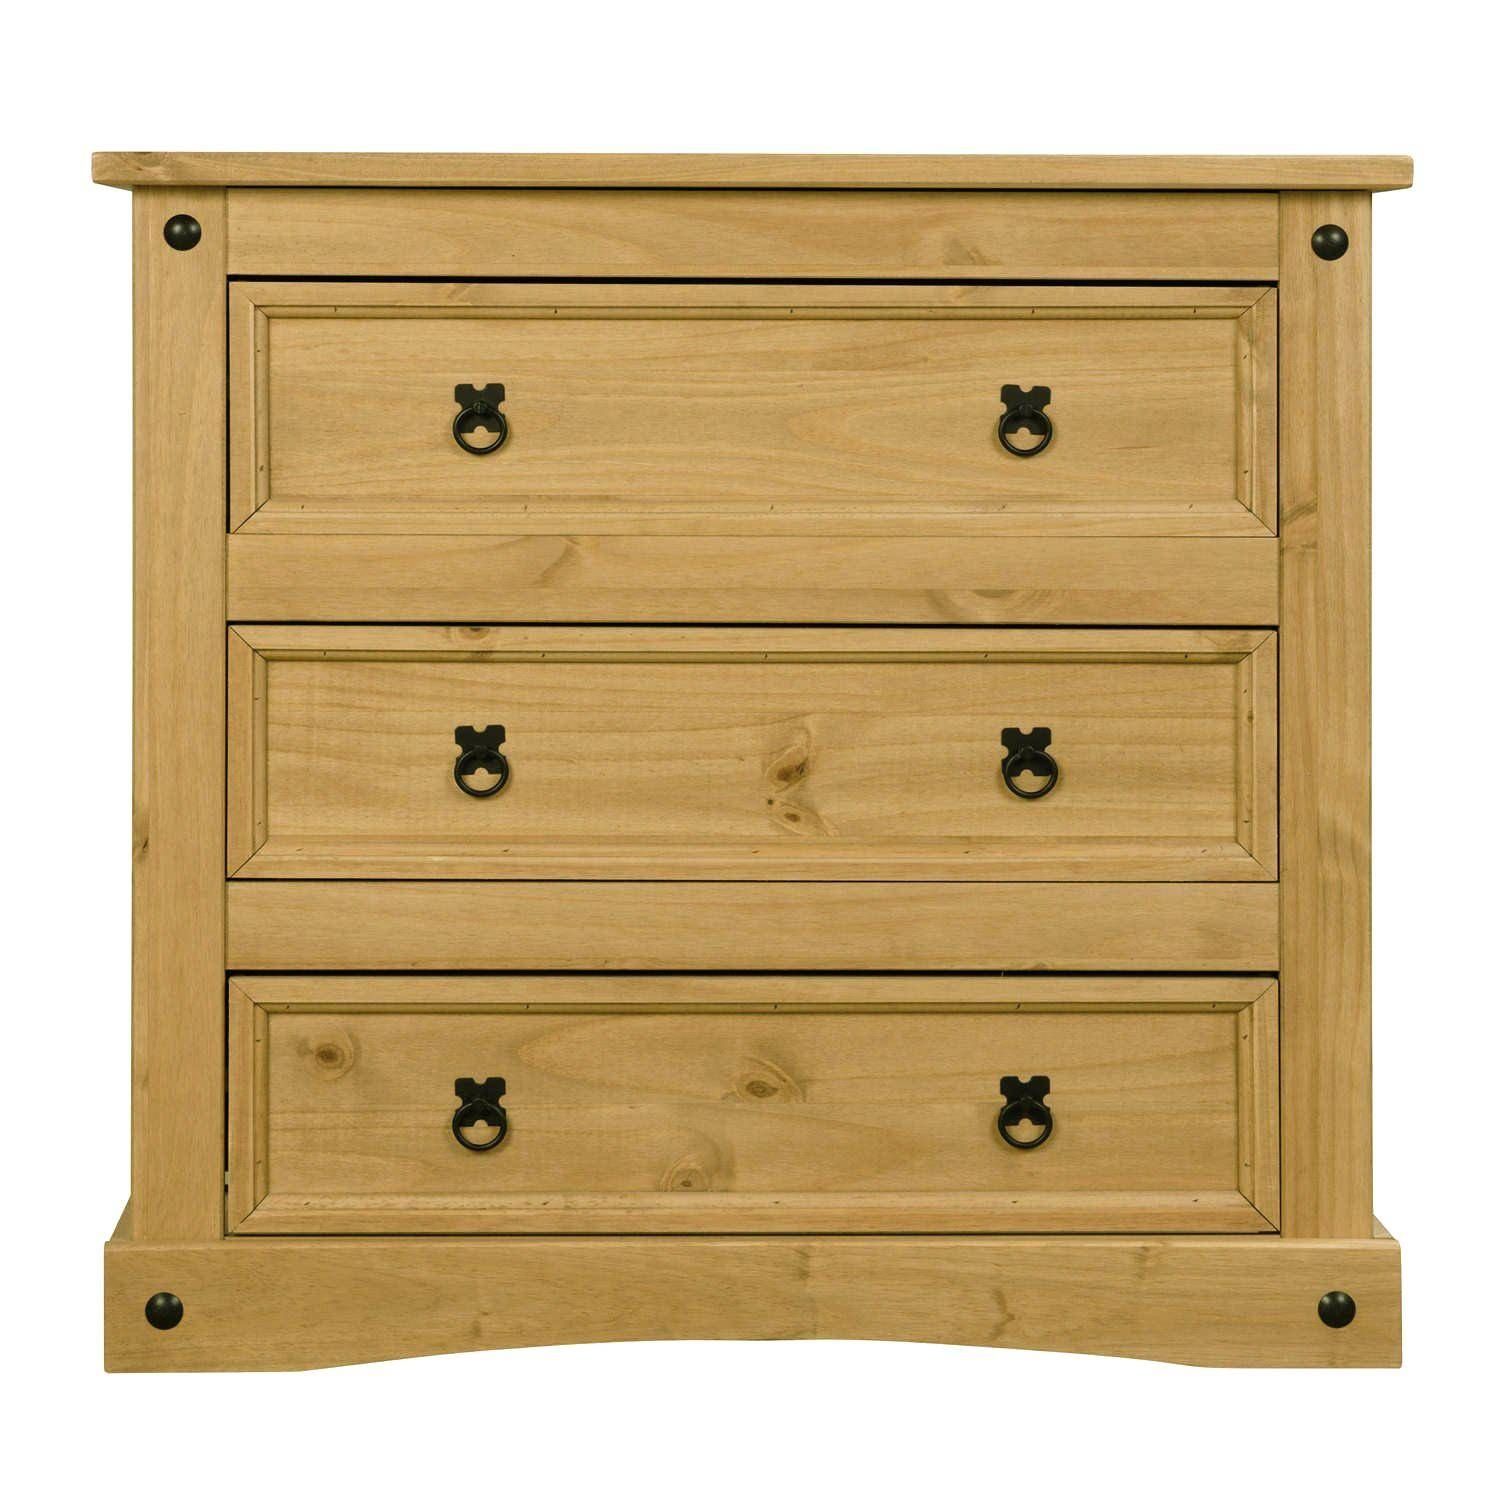 Remarkable Mexican Pine Bedroom Furniture – Soundvine (View 13 of 15)